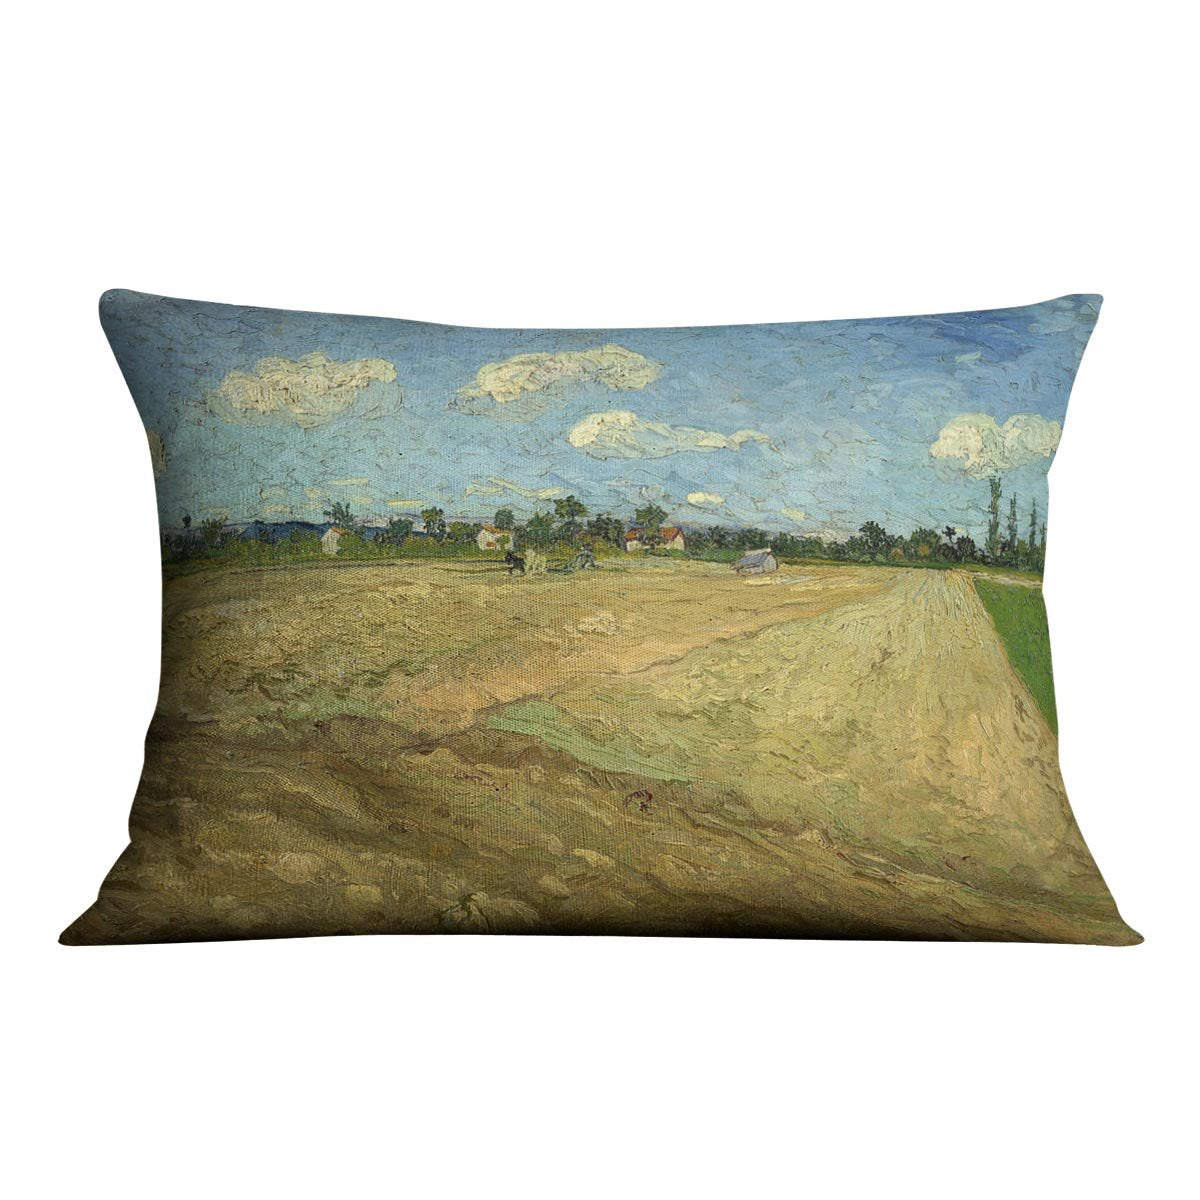 Ploughed fields by Van Gogh Throw Pillow